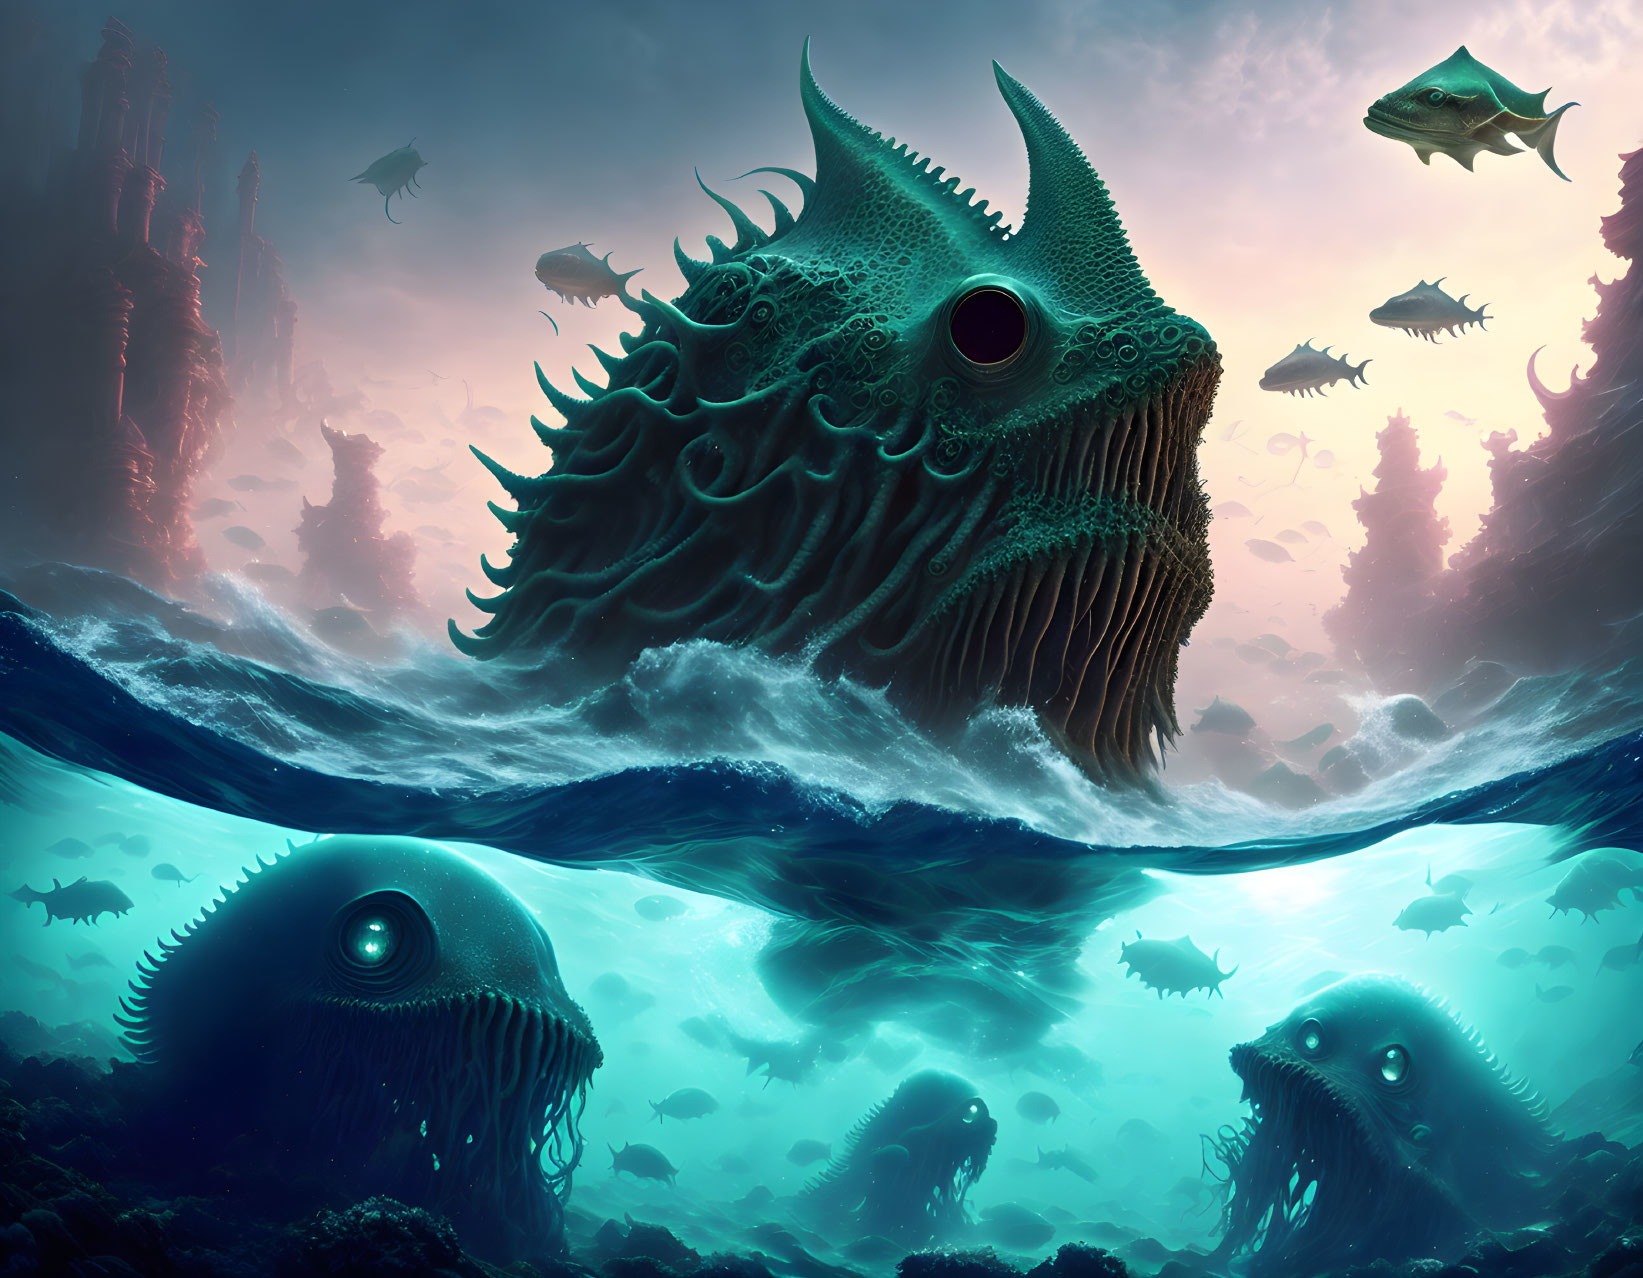 Fantastical one-eyed fish in surreal underwater scene